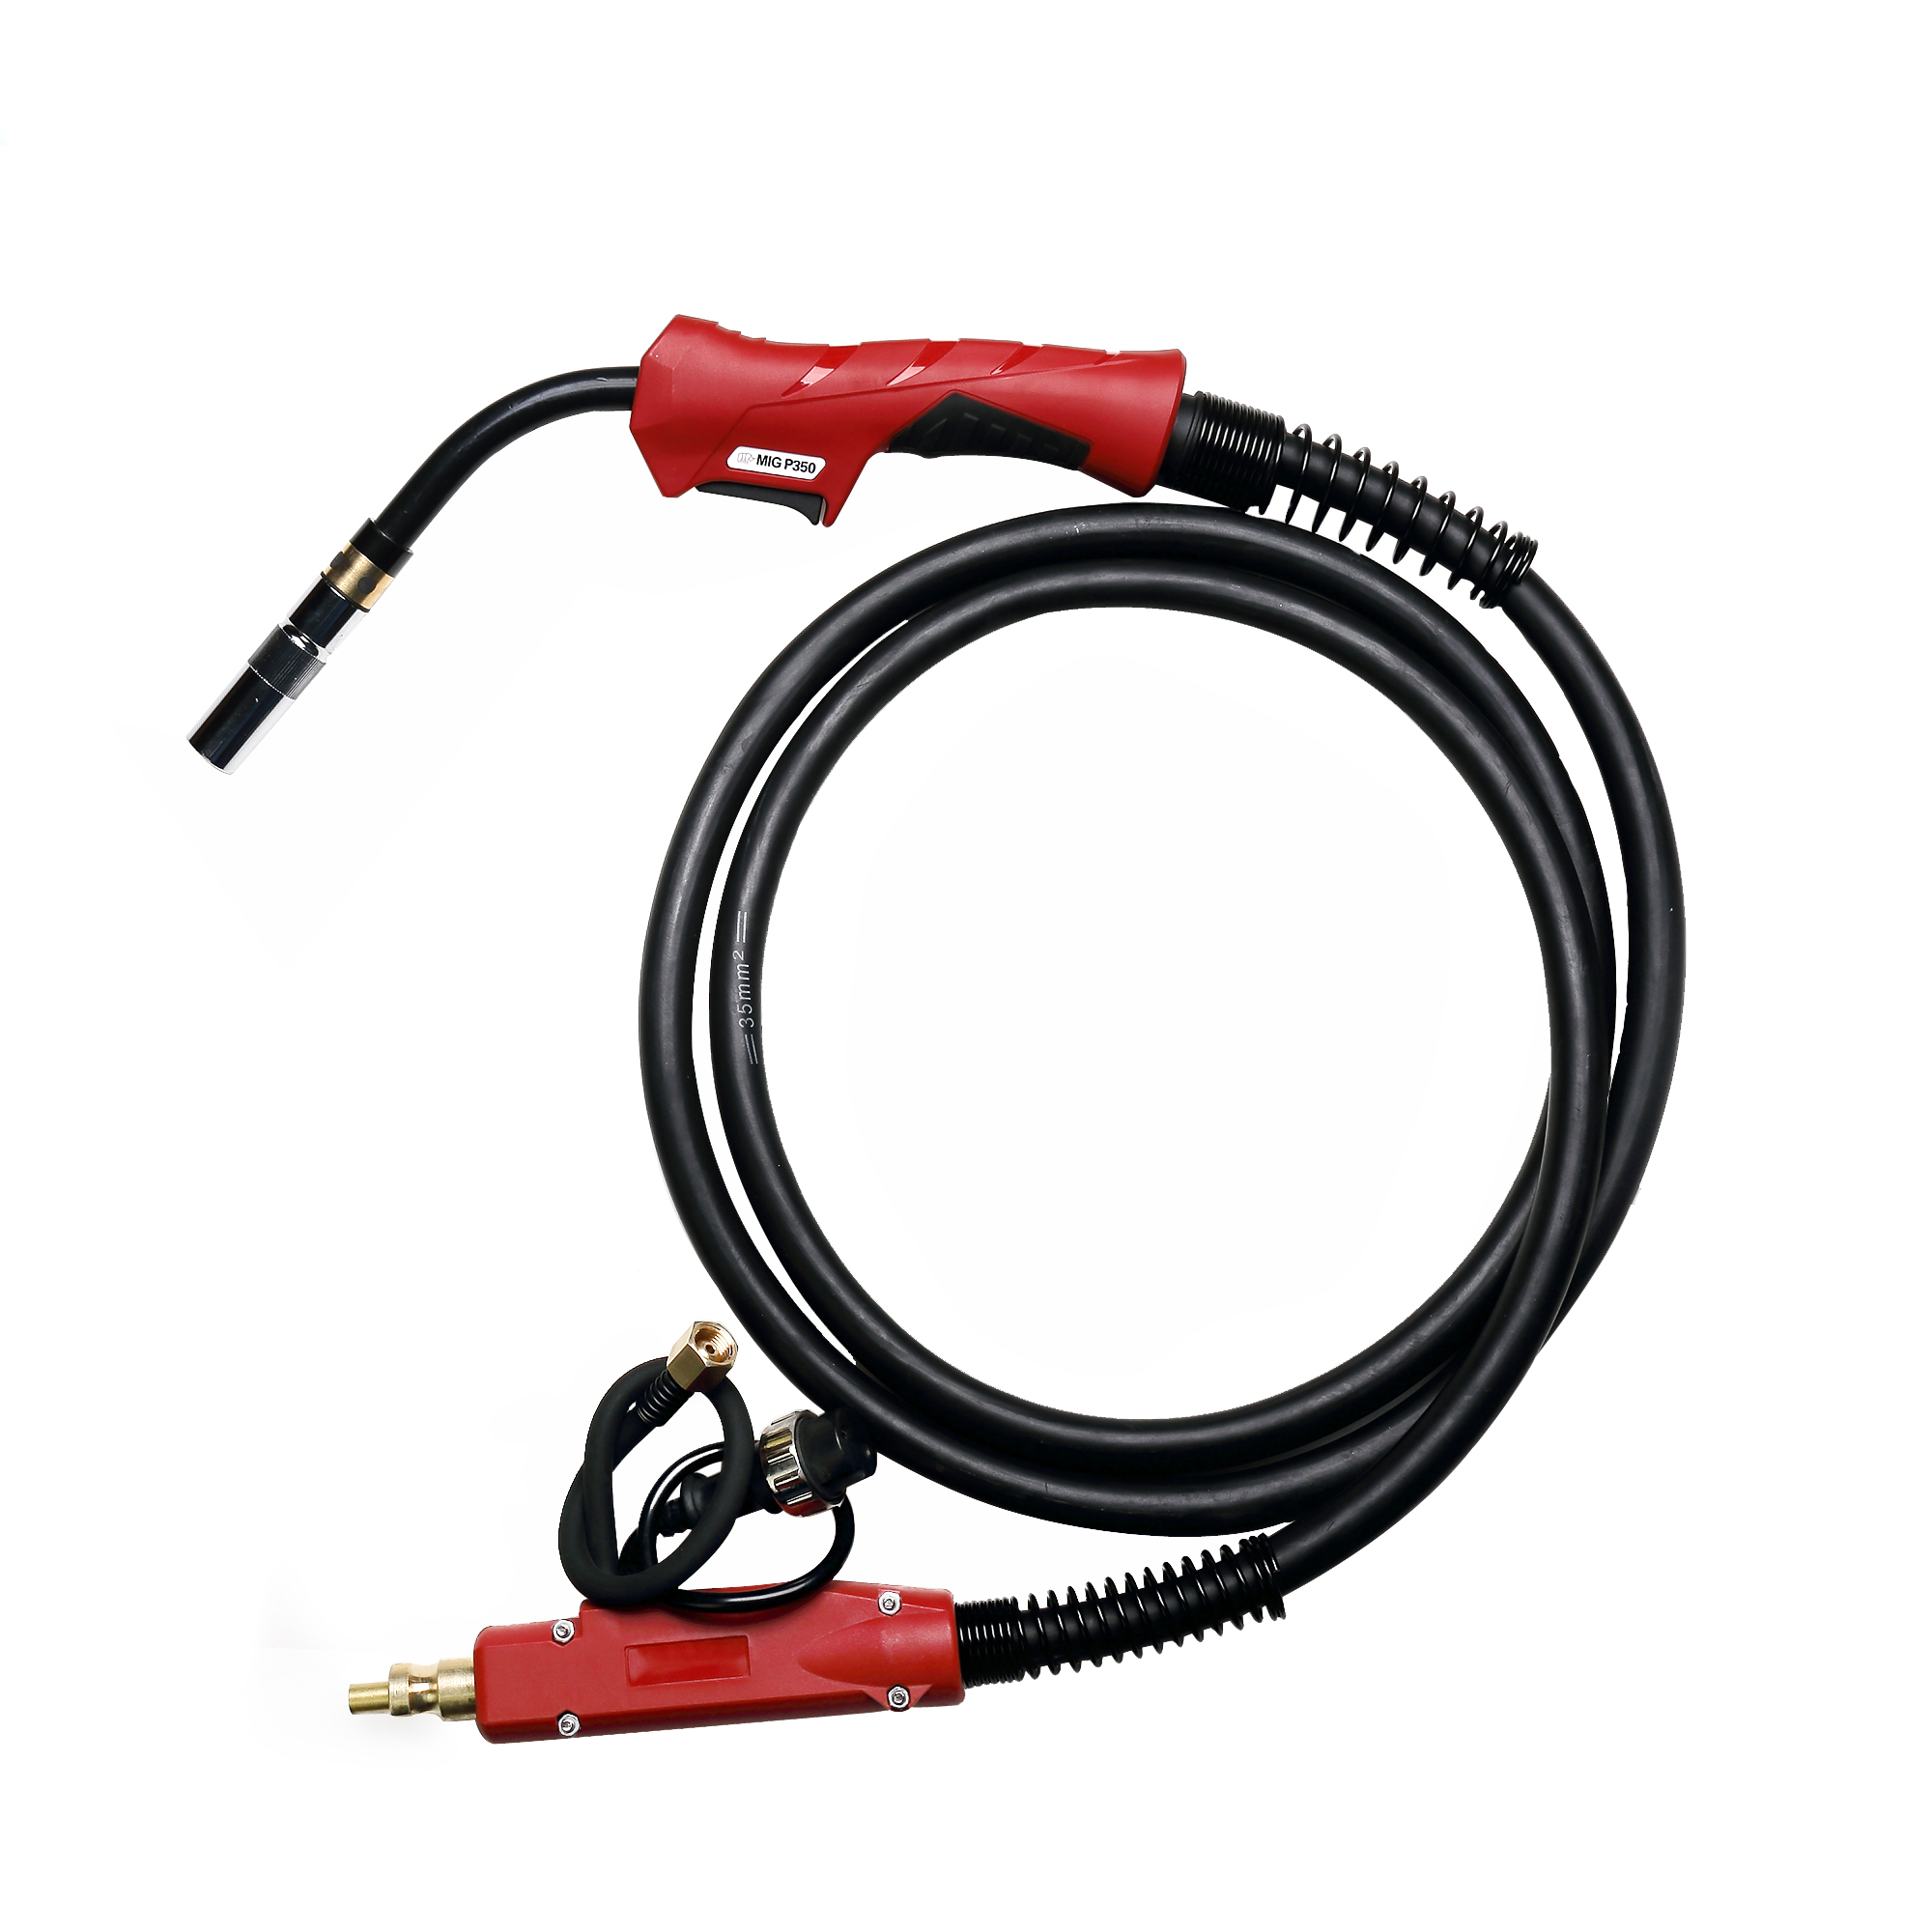 P180 Gas Cooled MIG Welding Torch - China Inwelt